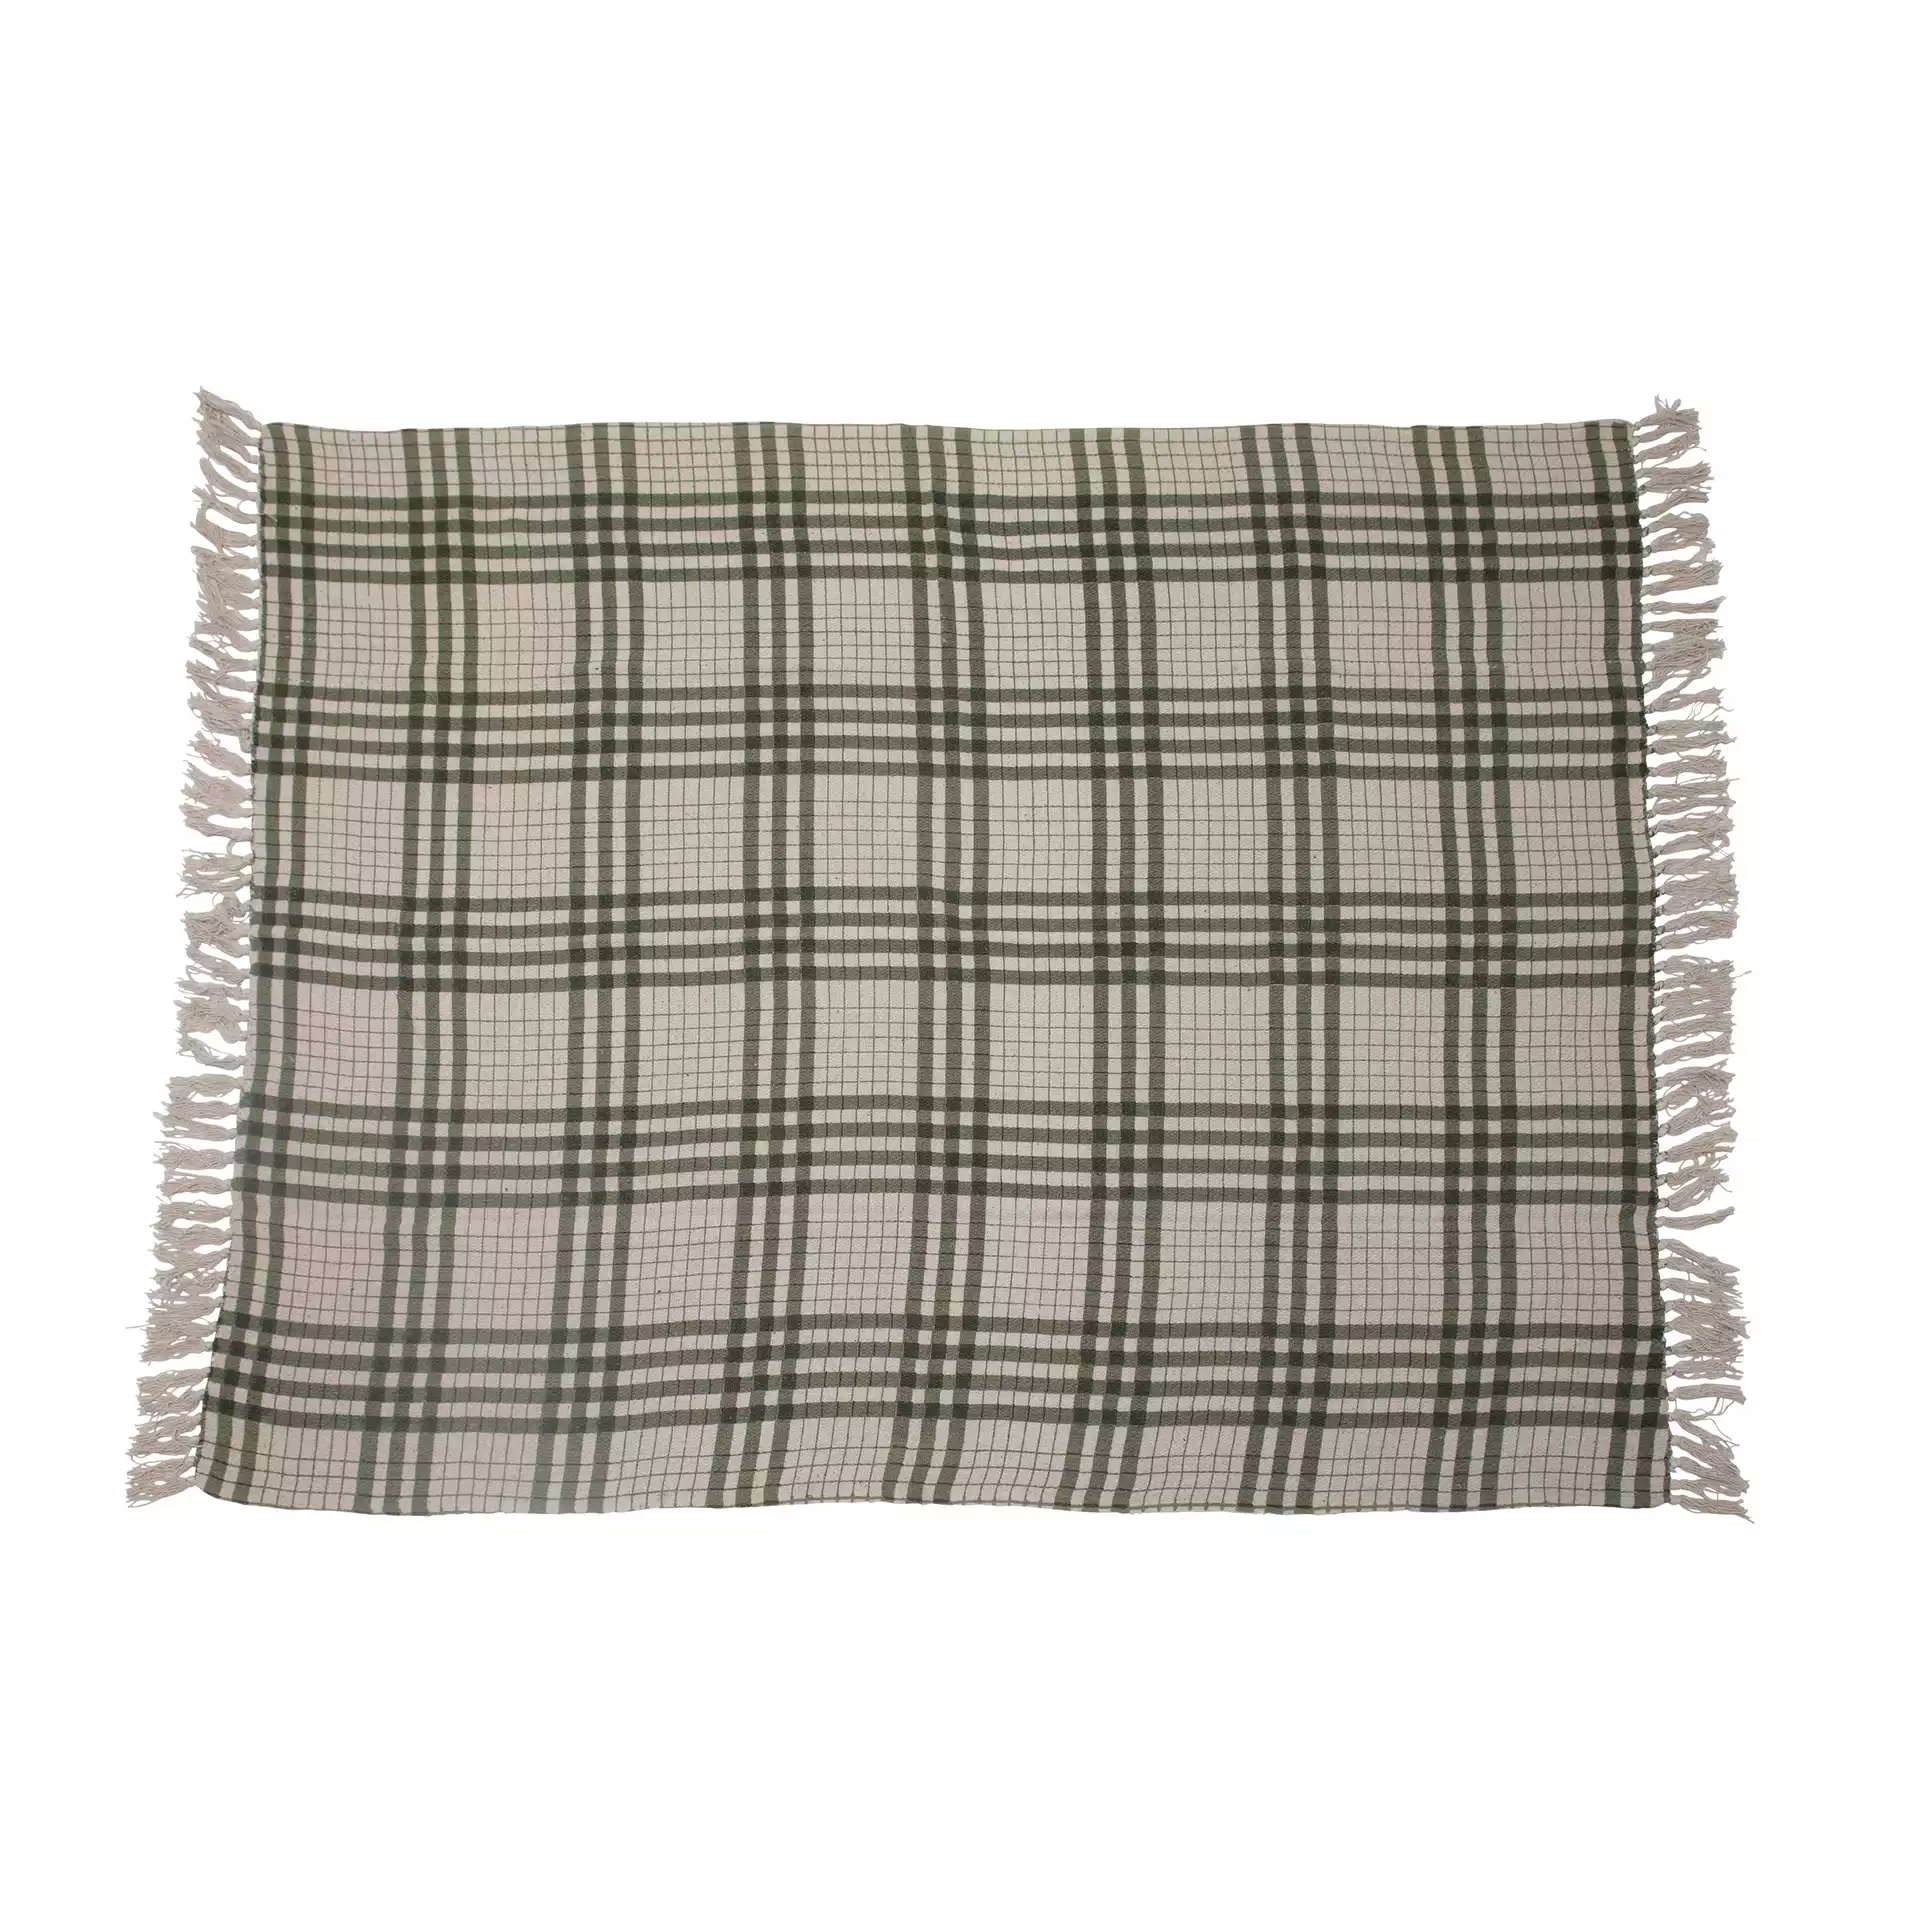 Recycled Cotton Printed Plaid Throw Blanket, Green